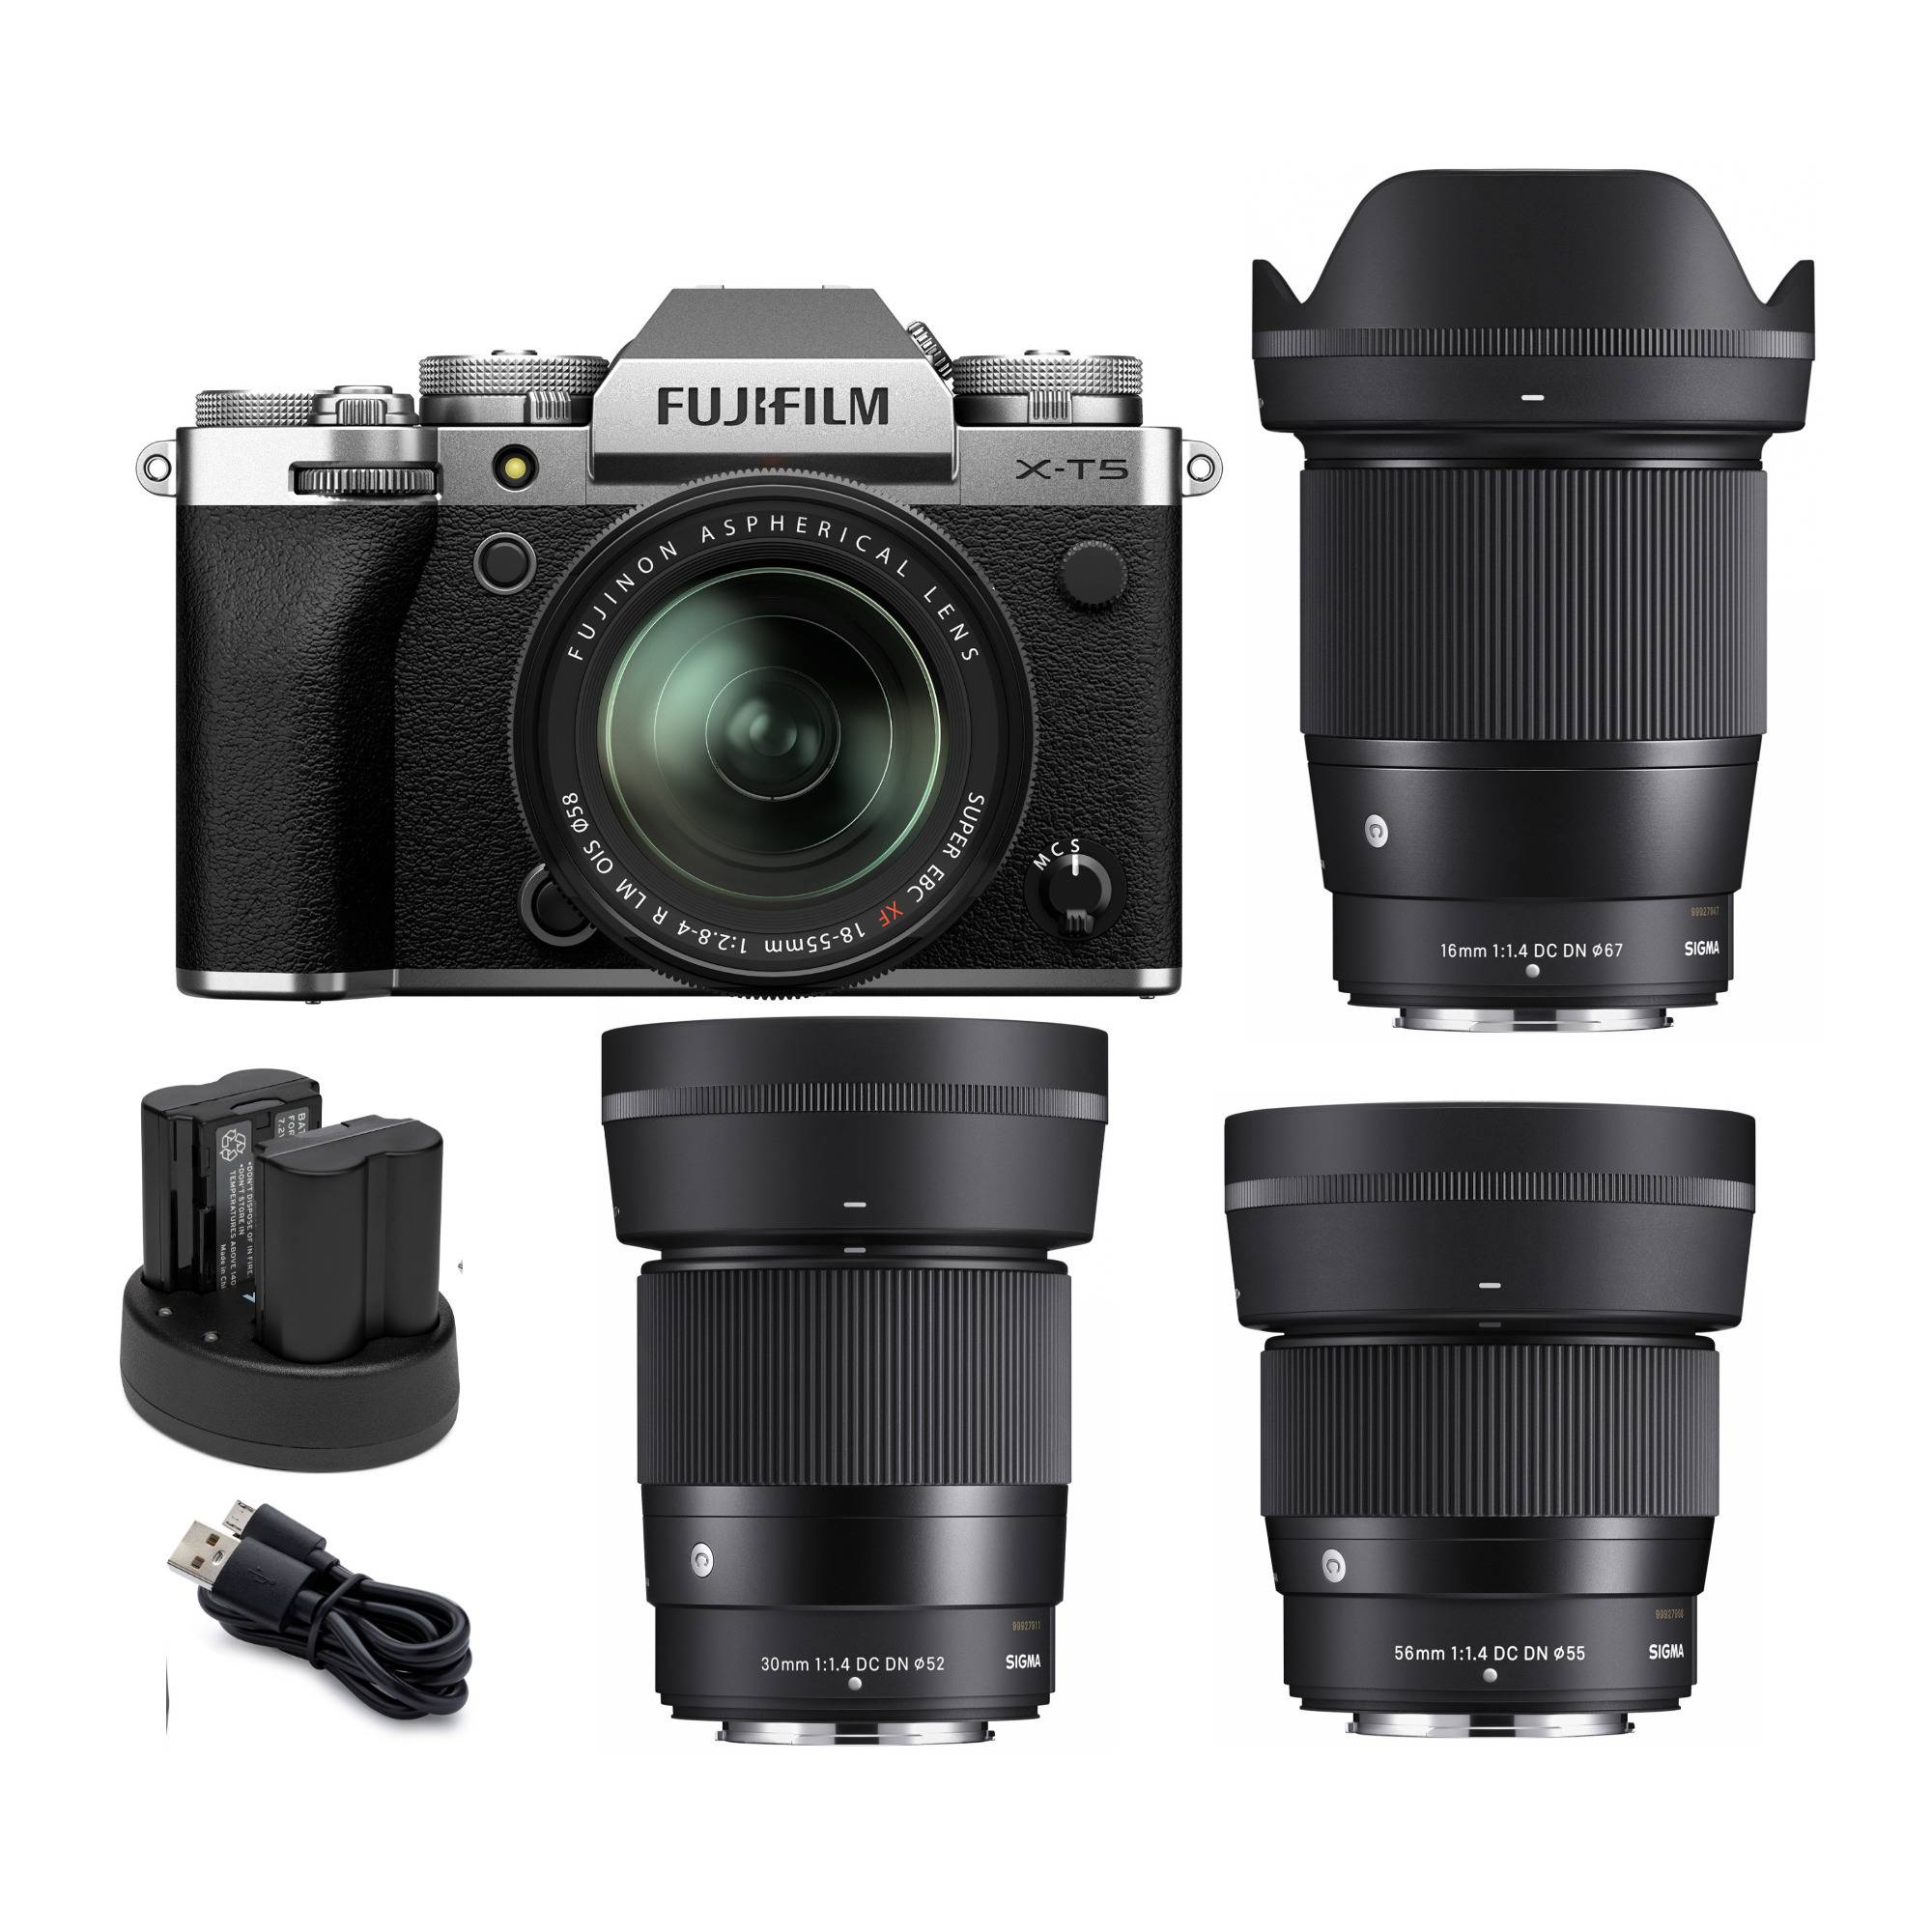 Fujifilm X-T5 Mirrorless Camera Body with XF18-55  (Silver) & 56mm, 30mm and 16mm Lens